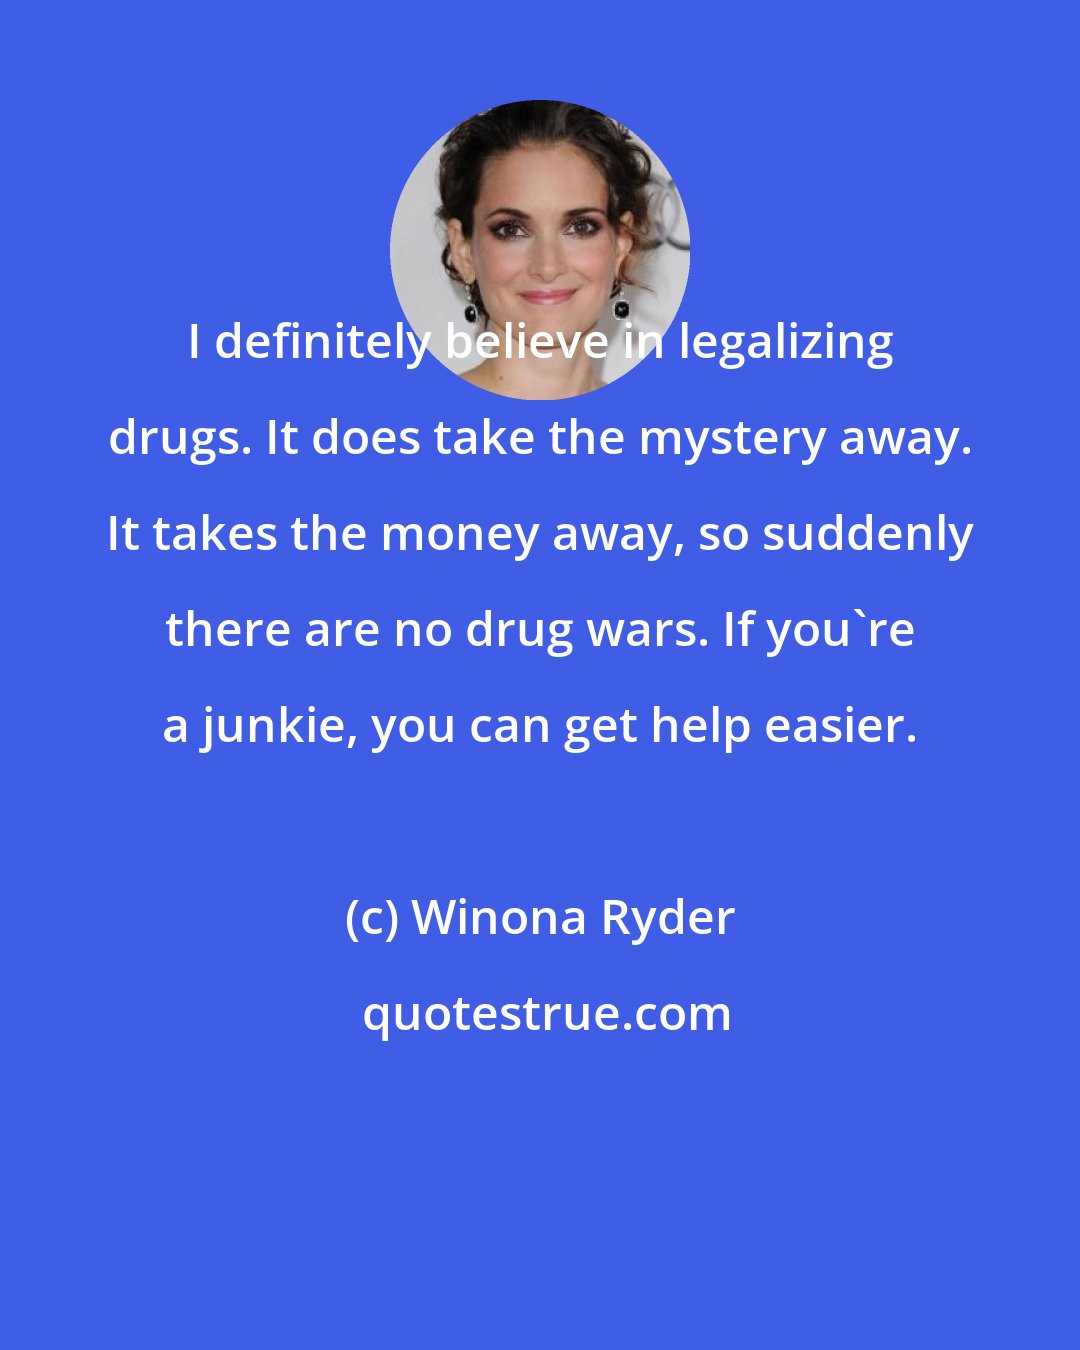 Winona Ryder: I definitely believe in legalizing drugs. It does take the mystery away. It takes the money away, so suddenly there are no drug wars. If you're a junkie, you can get help easier.